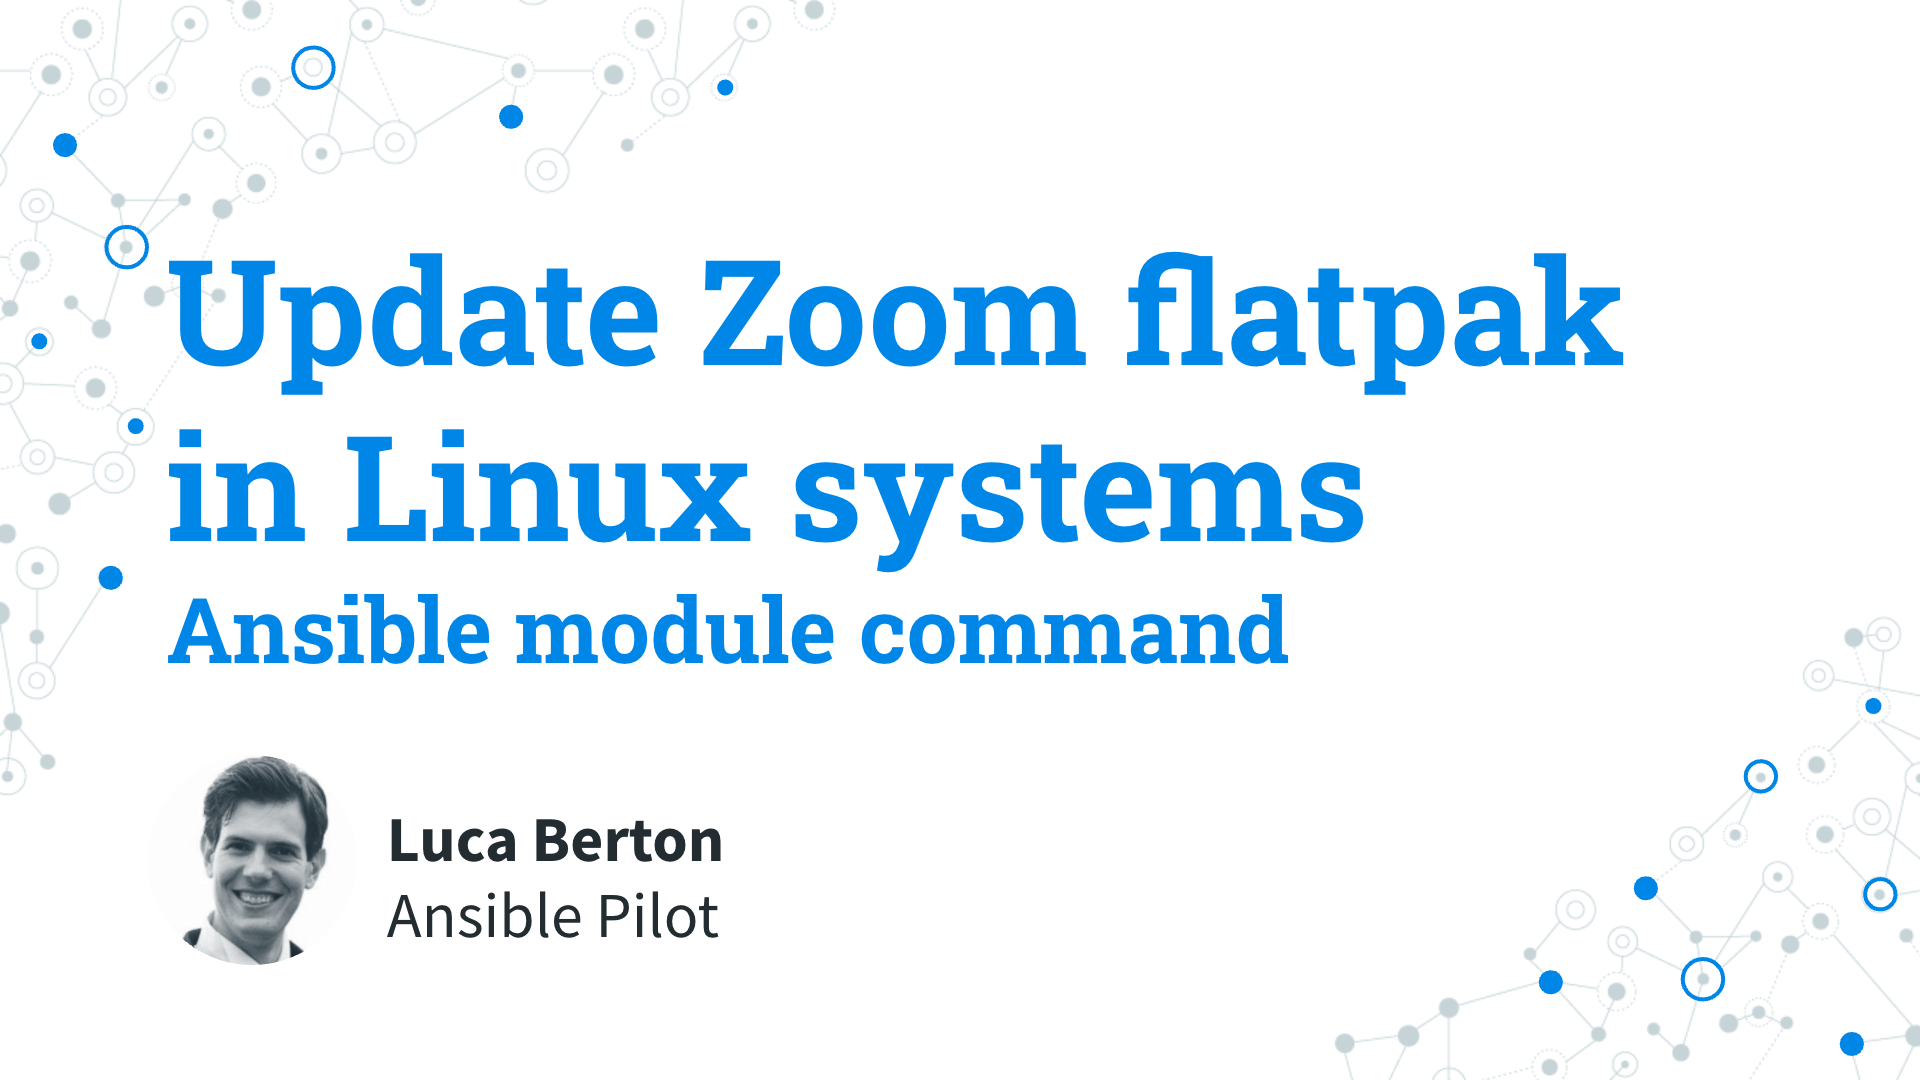 Update Zoom flatpak(s) in Linux systems - Ansible module command